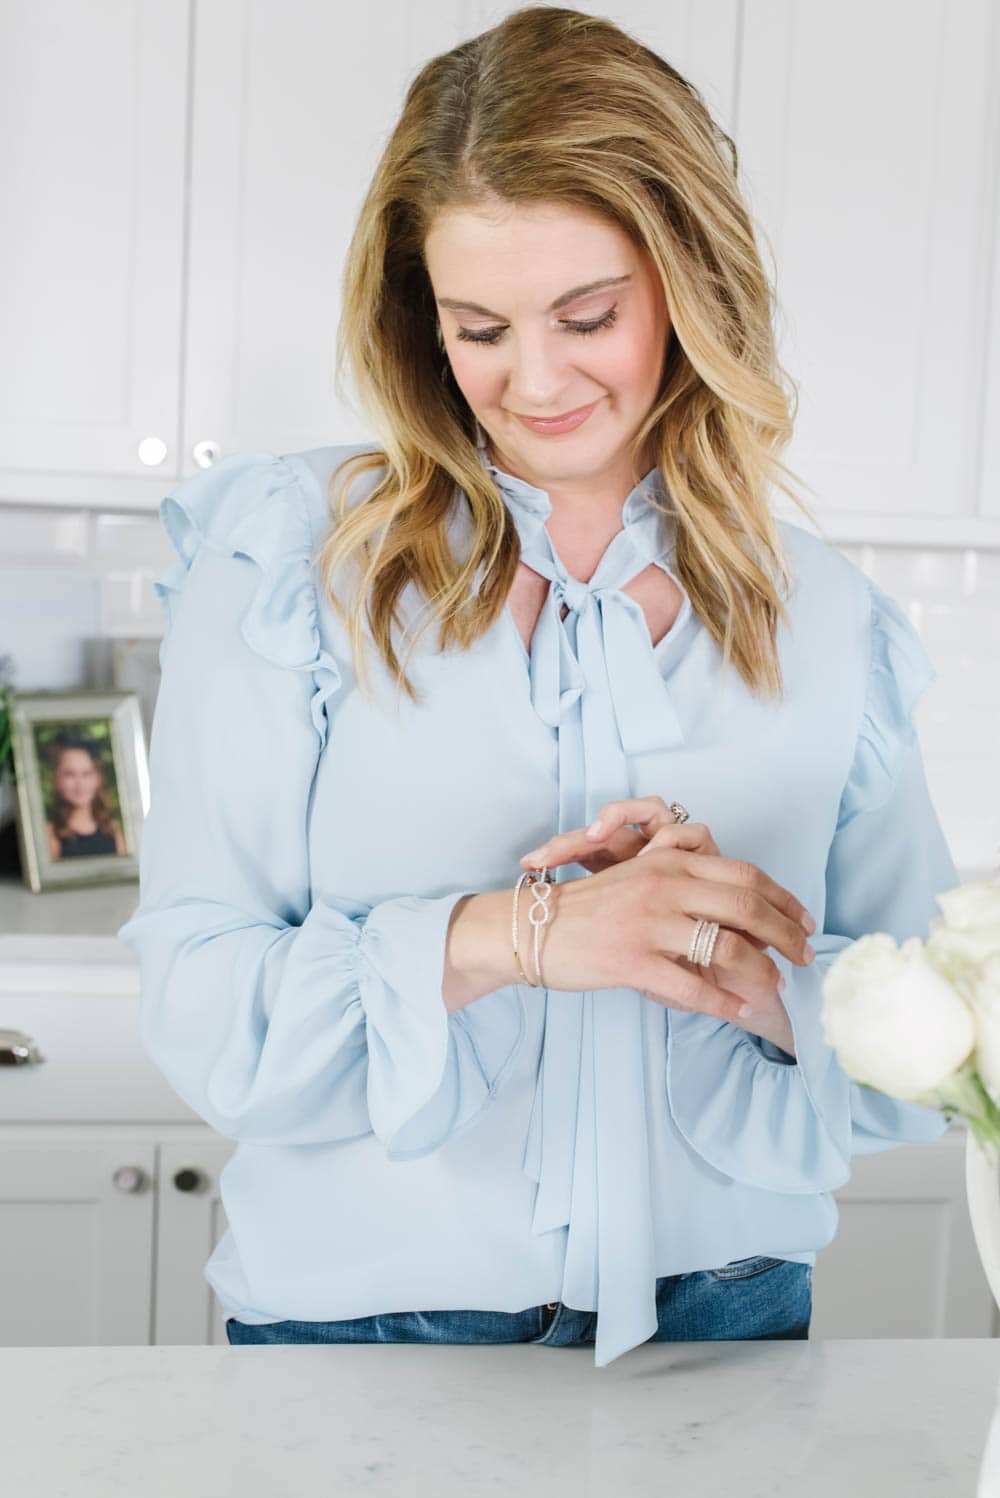 Mother’s Day gifts are so much more than just a card and flowers. Give the gift of fine jewelry from Kohl’s that has sentimental value and can be passed down through the family for generations to come. #ad #KohlsJewelry #KohlsFinds